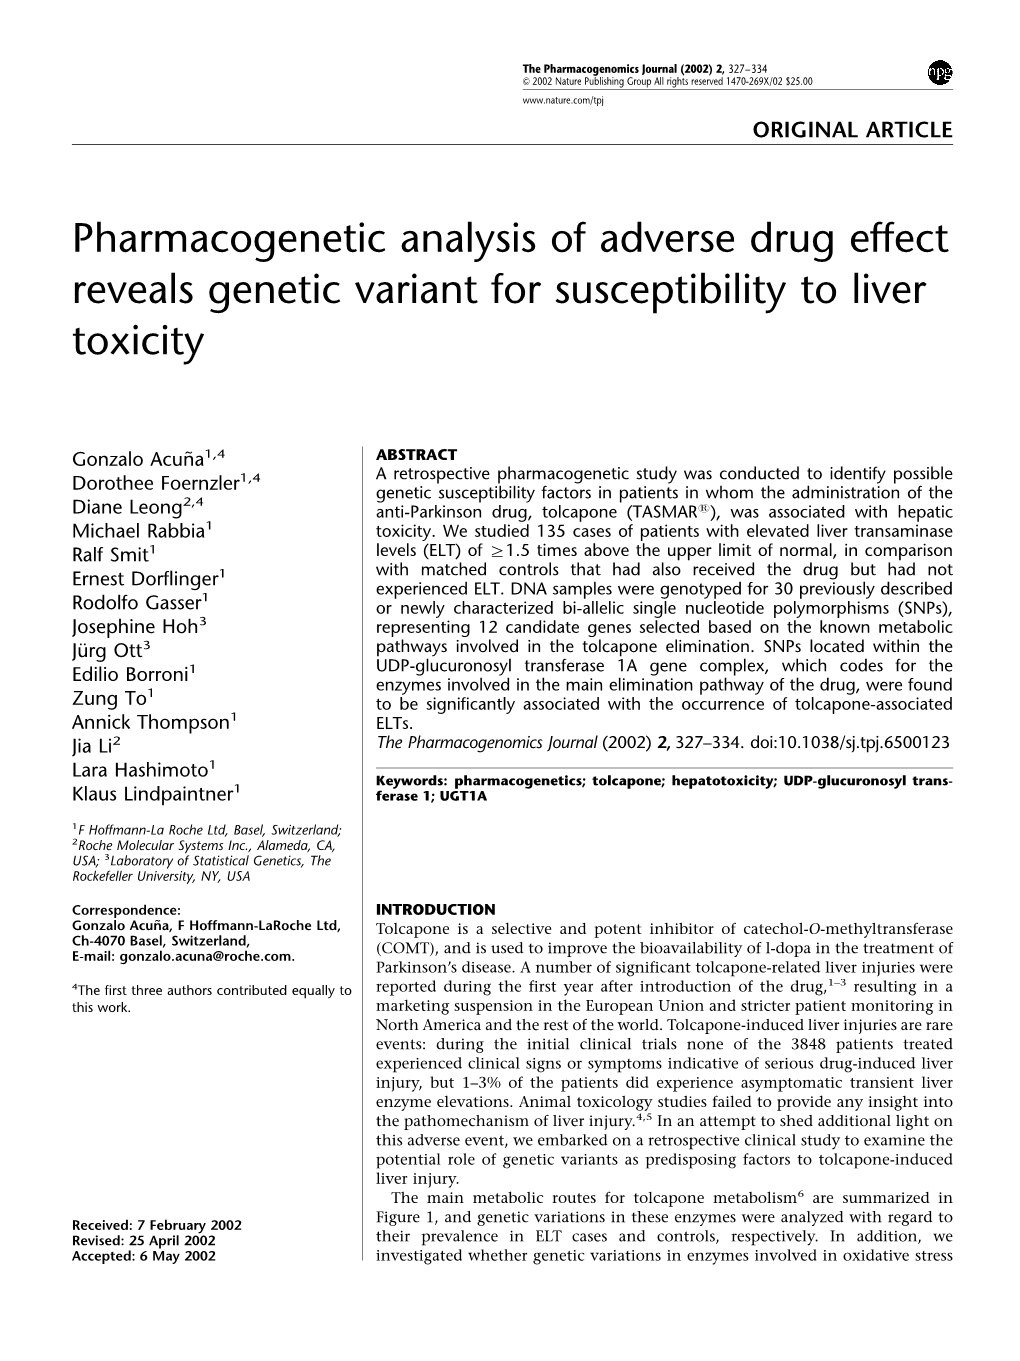 Pharmacogenetic Analysis of Adverse Drug Effect Reveals Genetic Variant for Susceptibility to Liver Toxicity